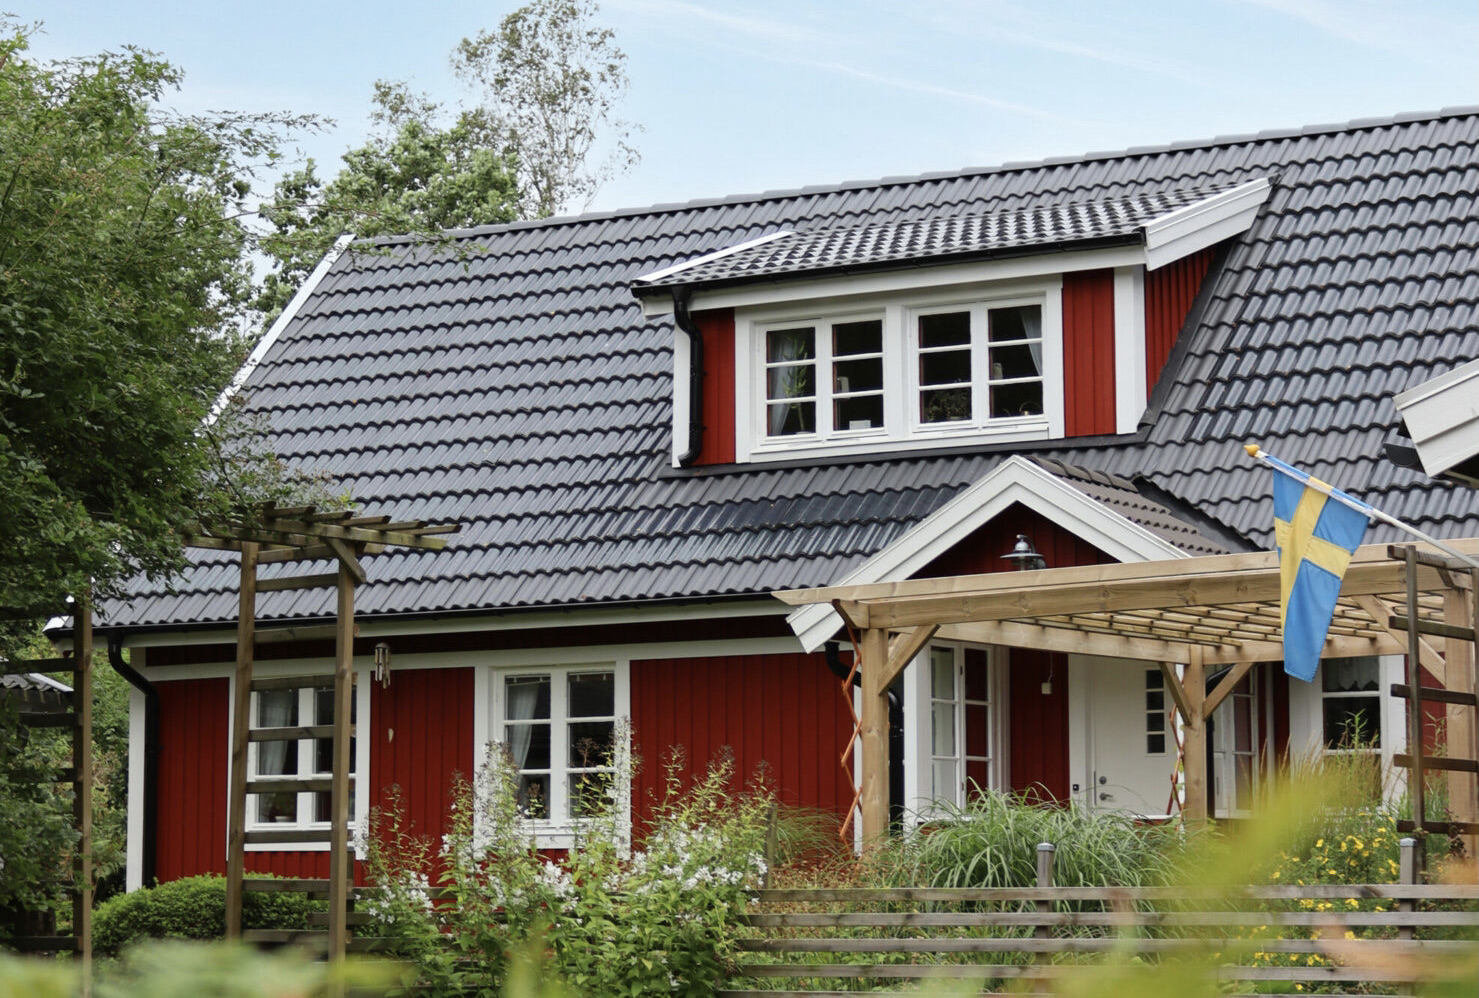 Swedish manufacturer of solar cell roof tiles